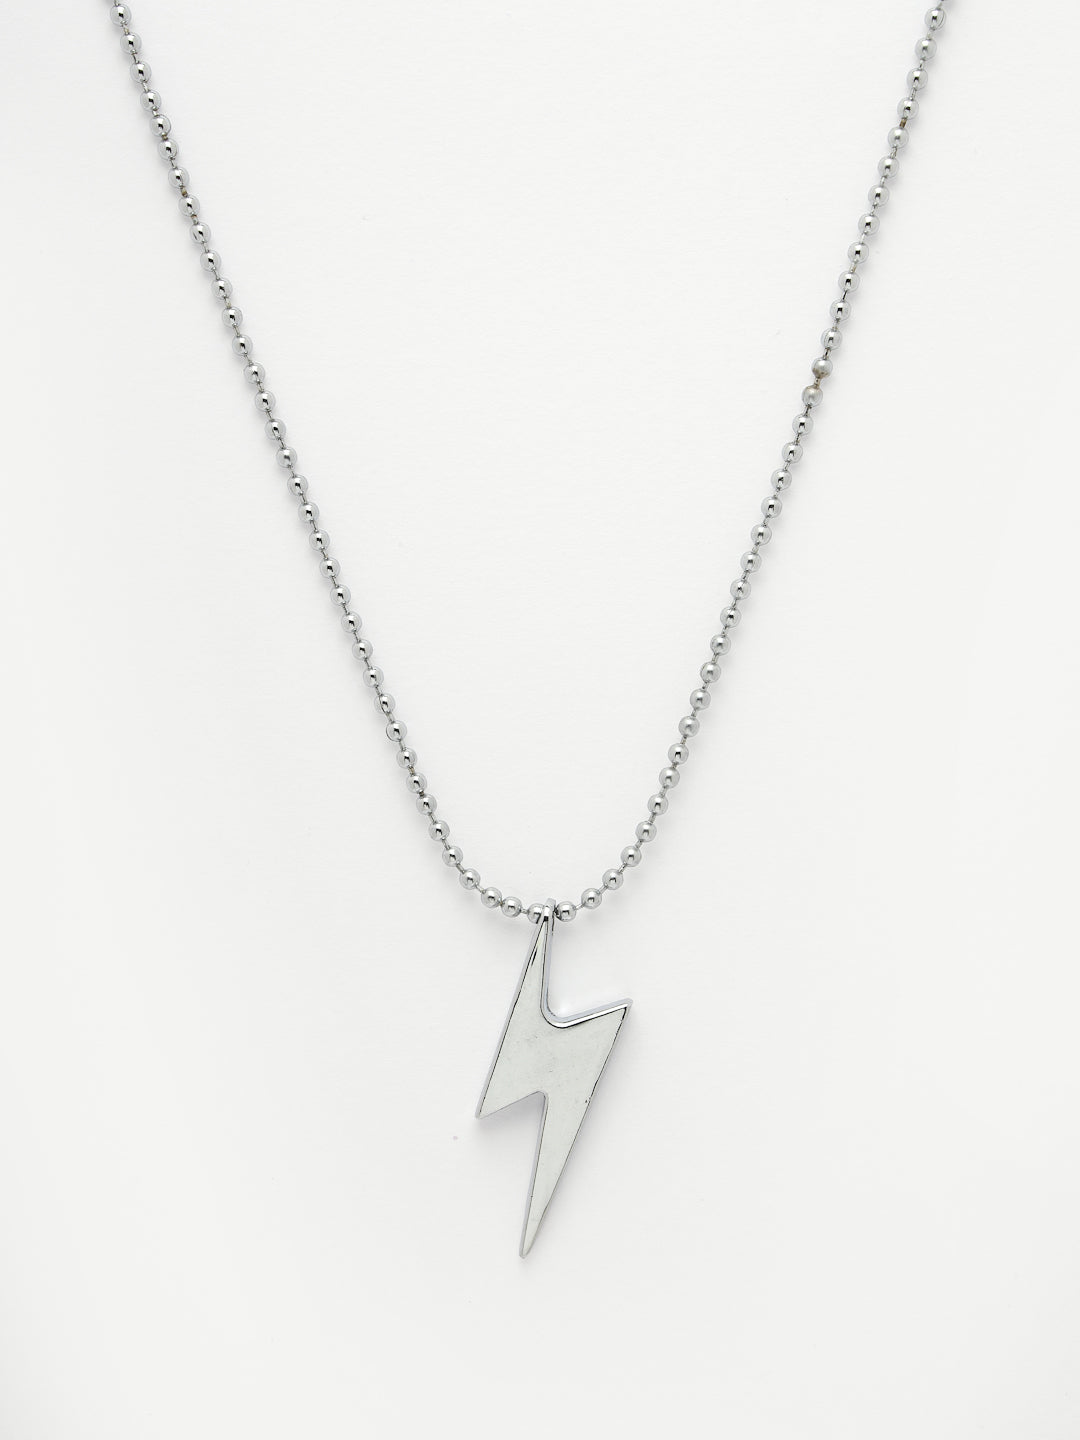 Men's silver plated flash pendent with chain - NVR